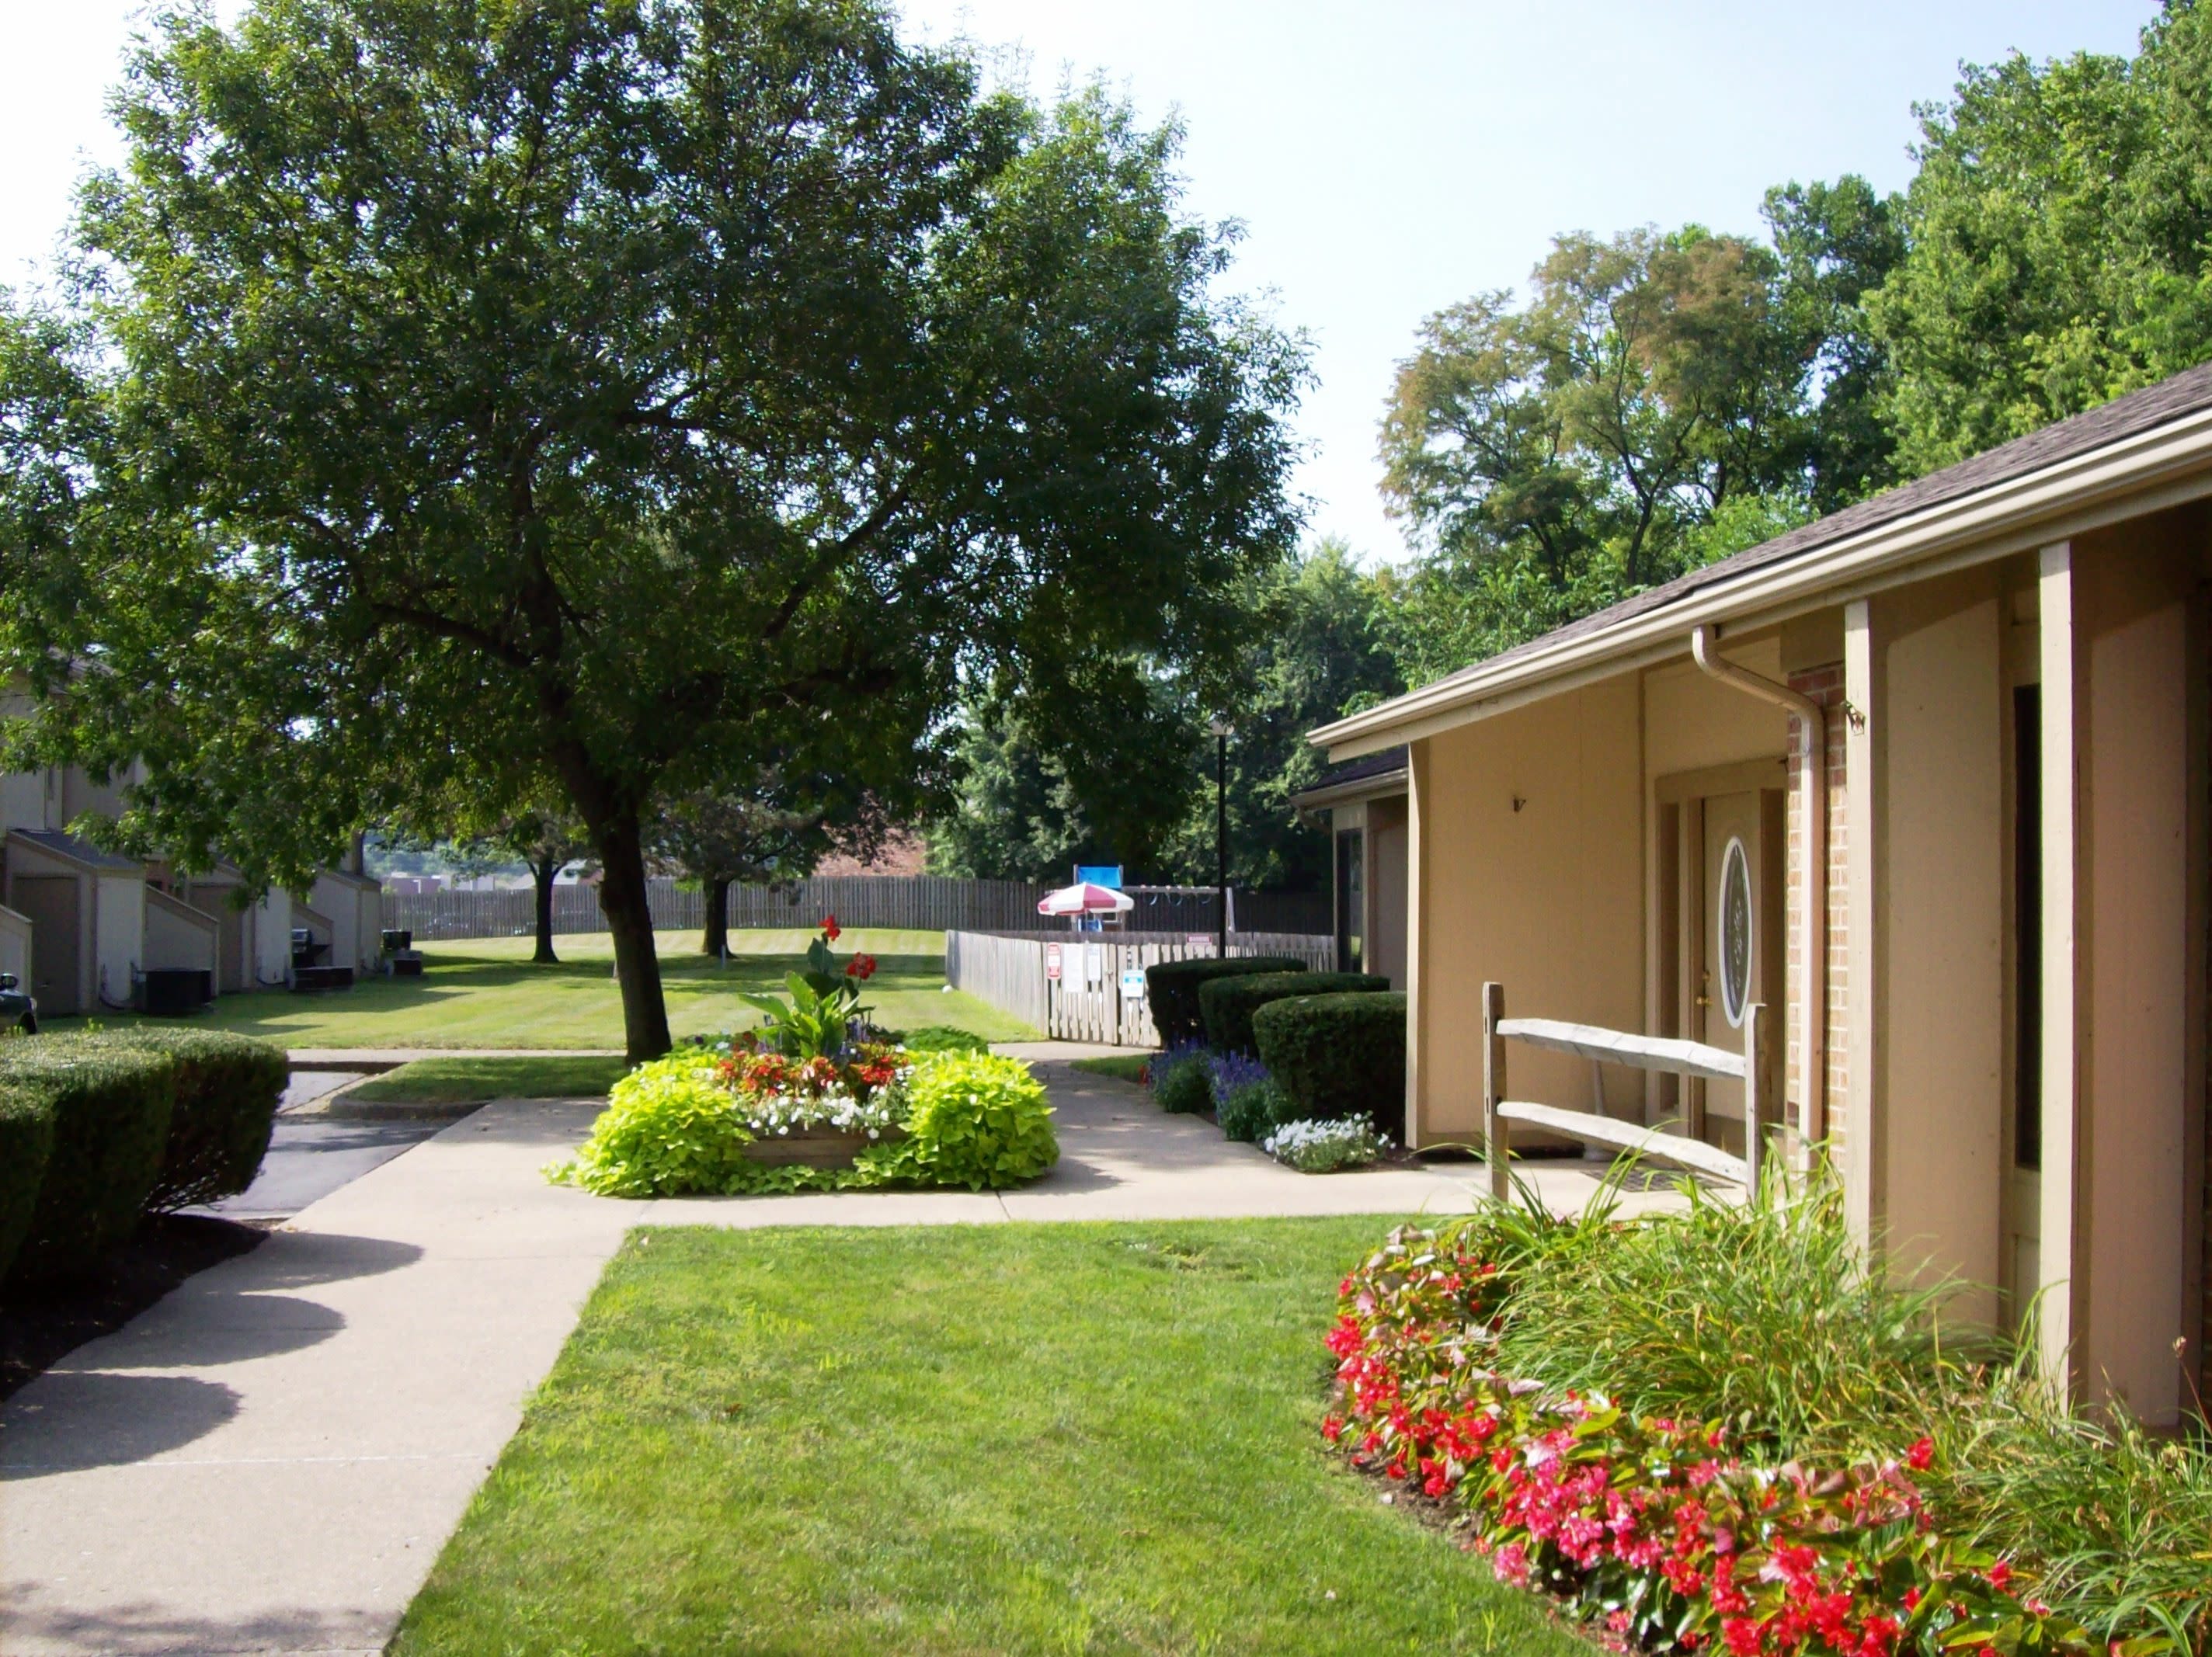 Exterior view of the apartments at North River Place in Chillicothe, Ohio